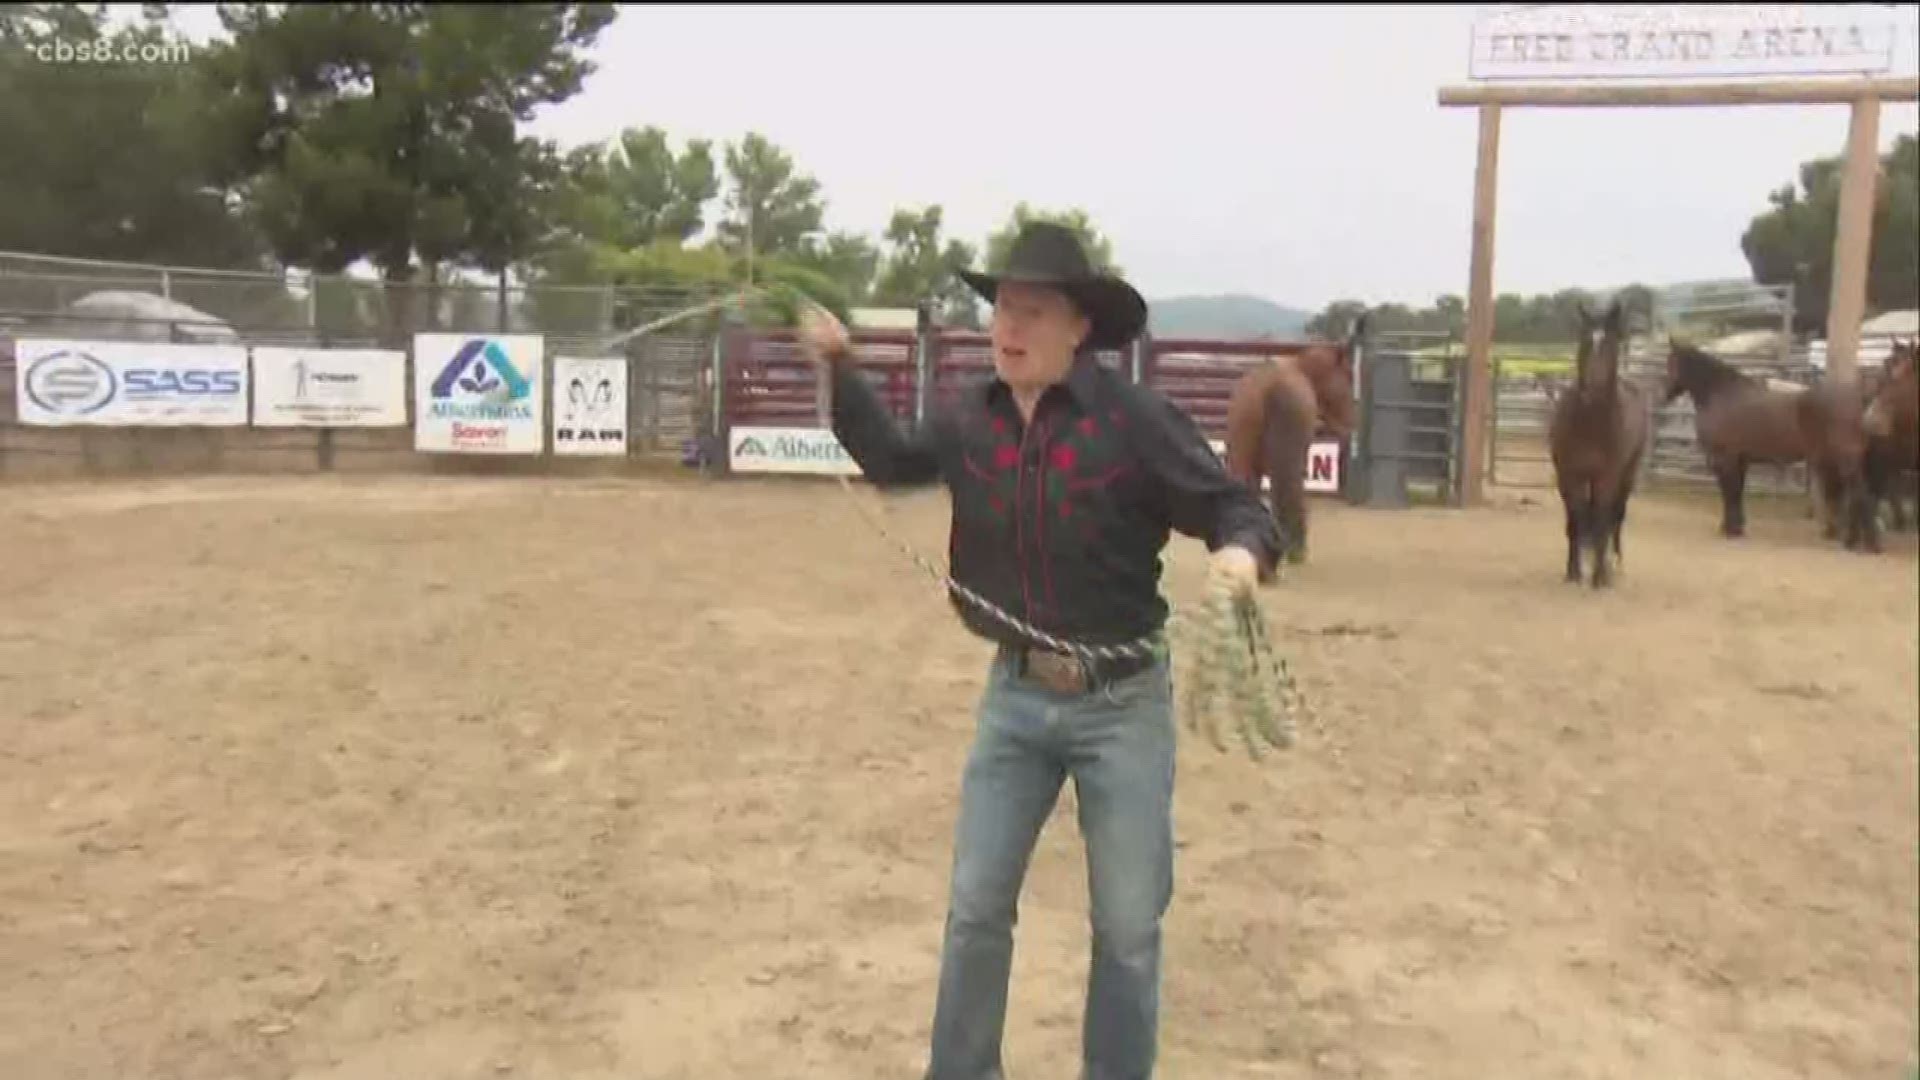 News 8's Ashley Jacobs stops by the rodeo, taking you inside before gates open to see what organizers call the best hometown hospitality you will find at a rodeo.